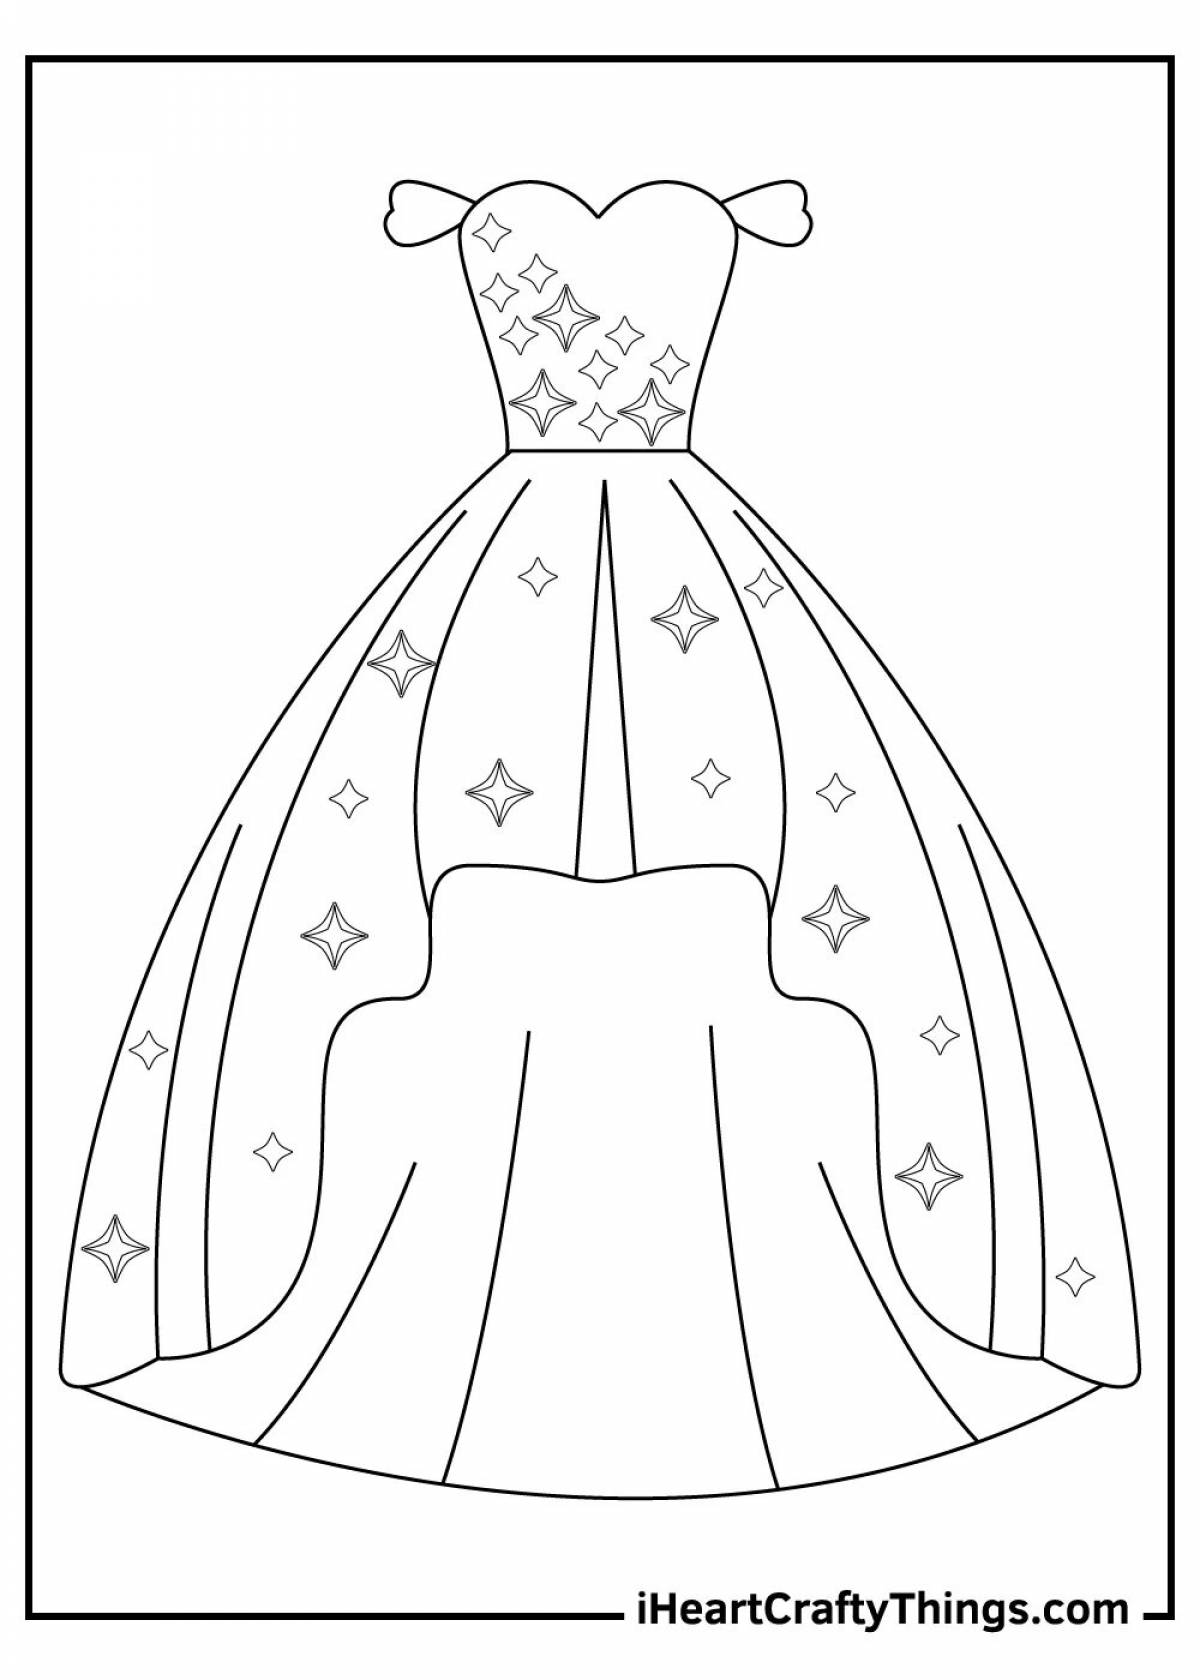 Coloring book luxury doll dress for children 4-5 years old